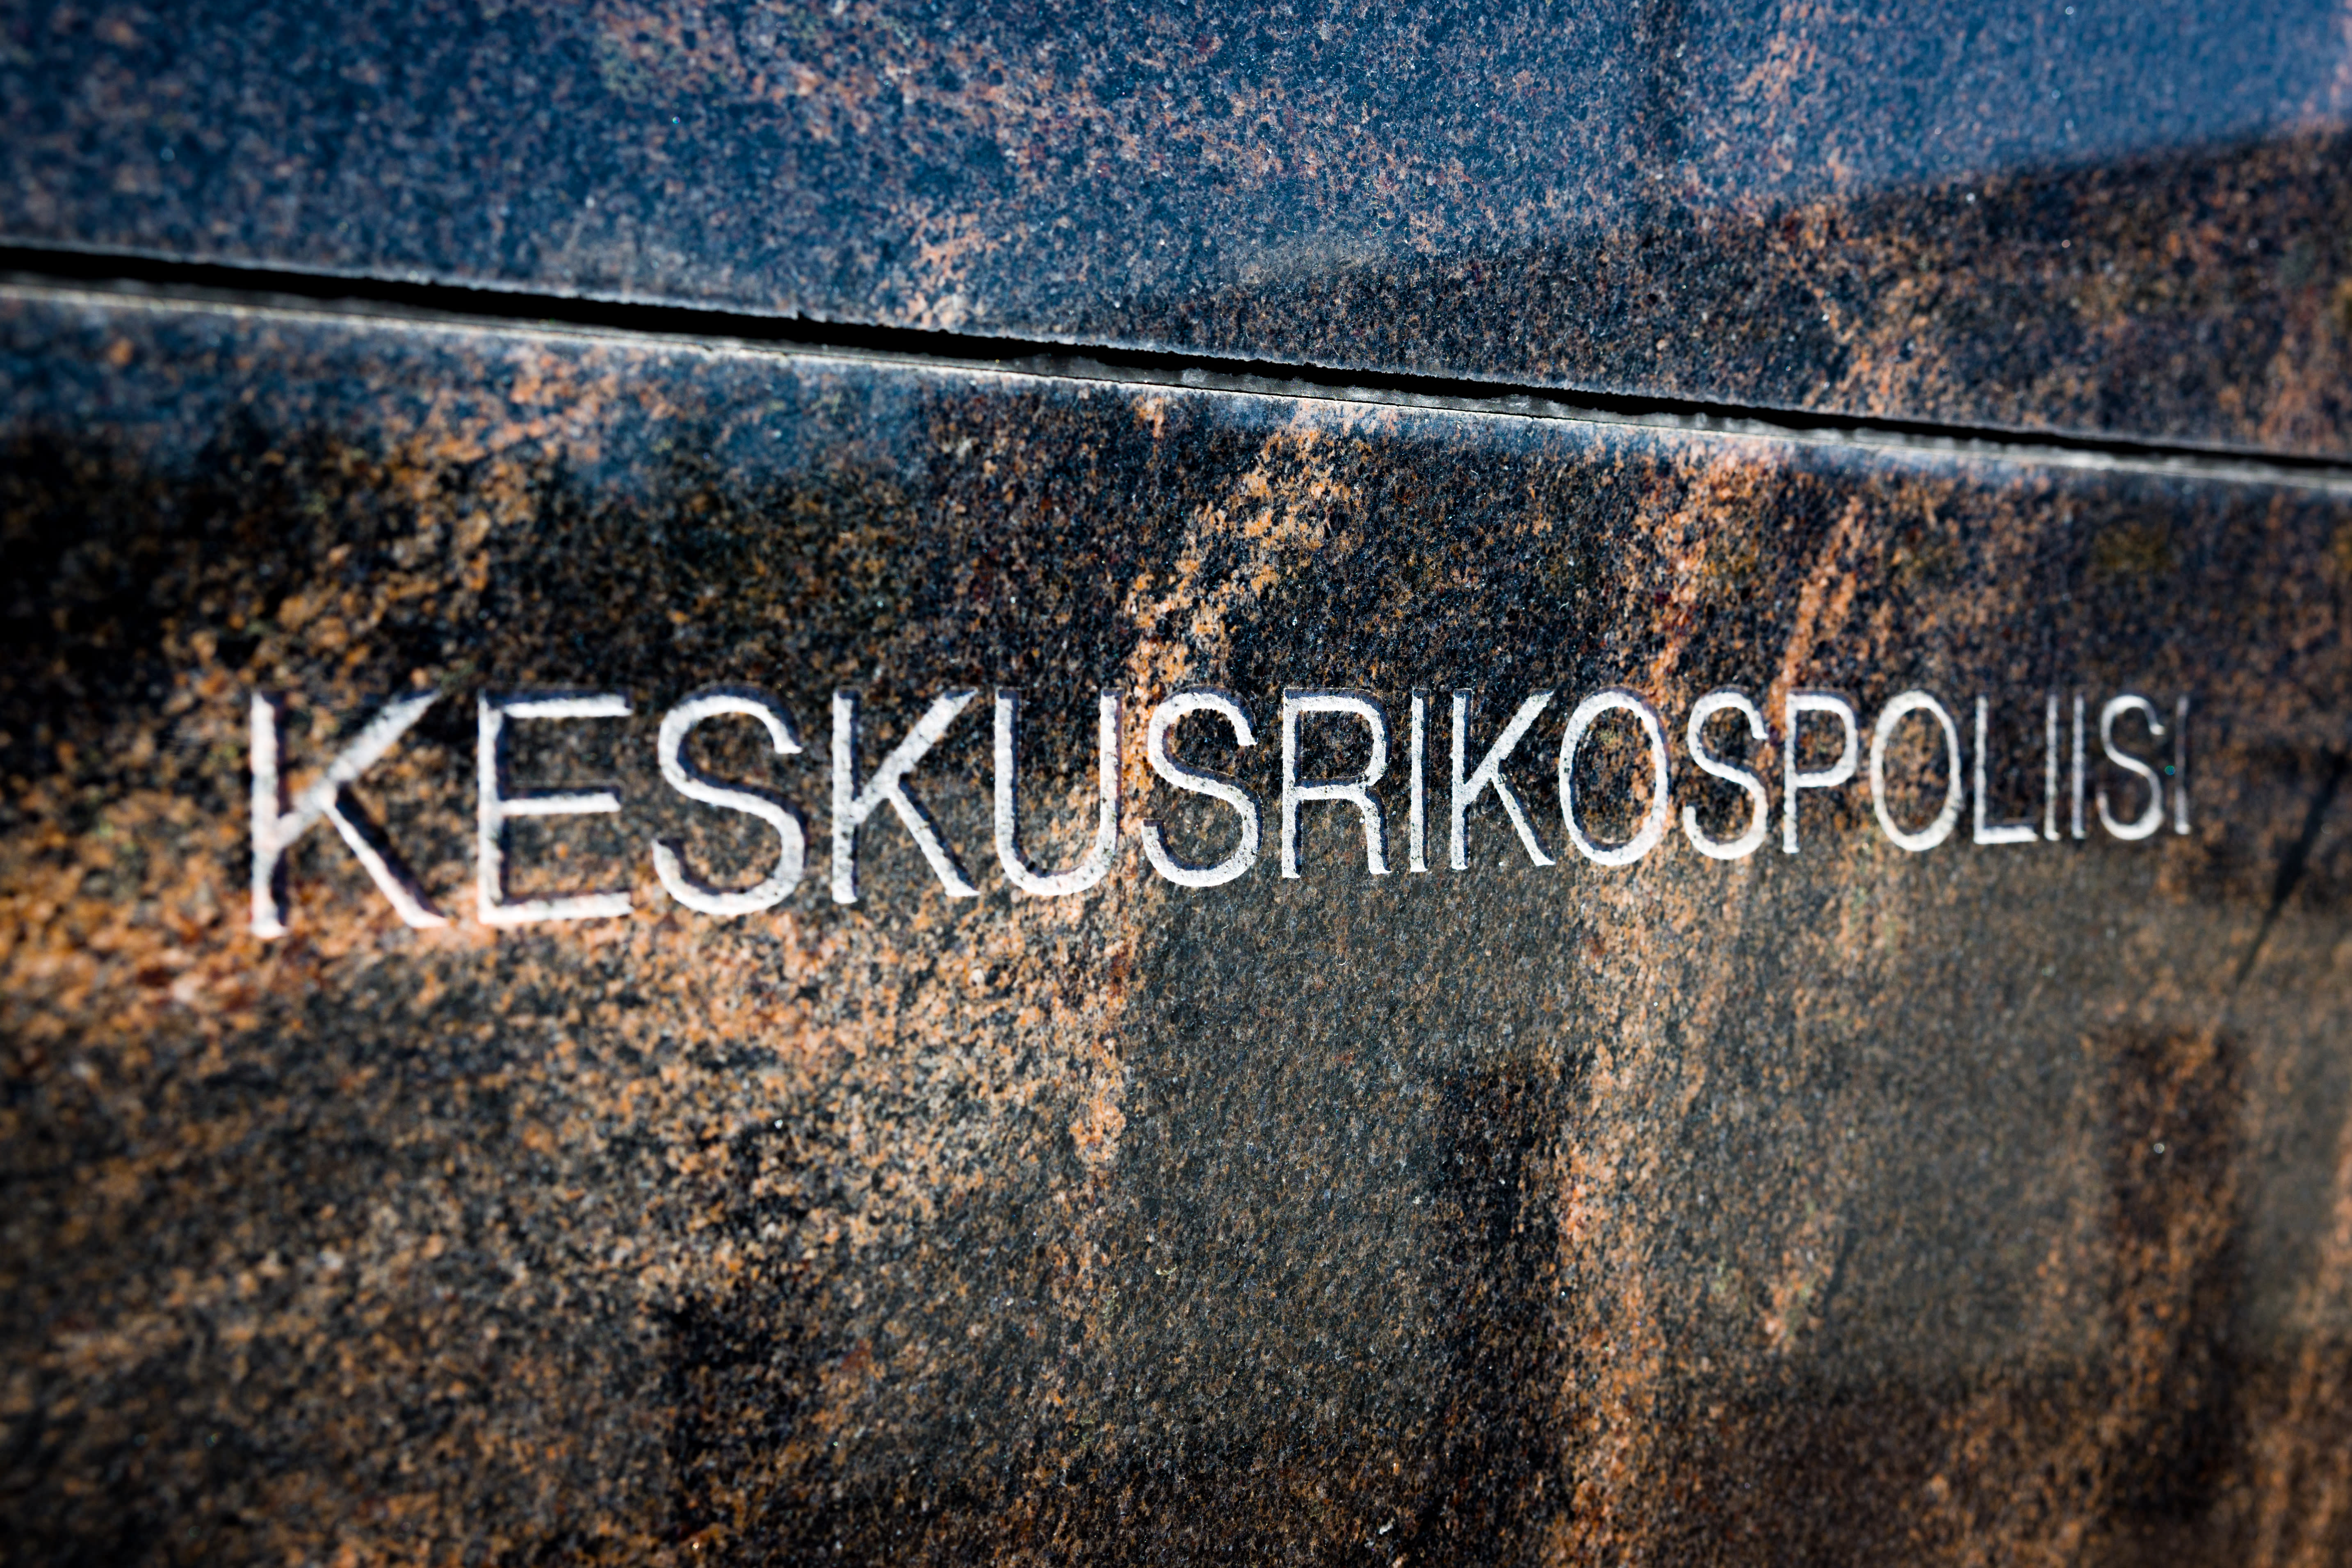 An extraordinary number of espionage cases have been reported to the Finnish police